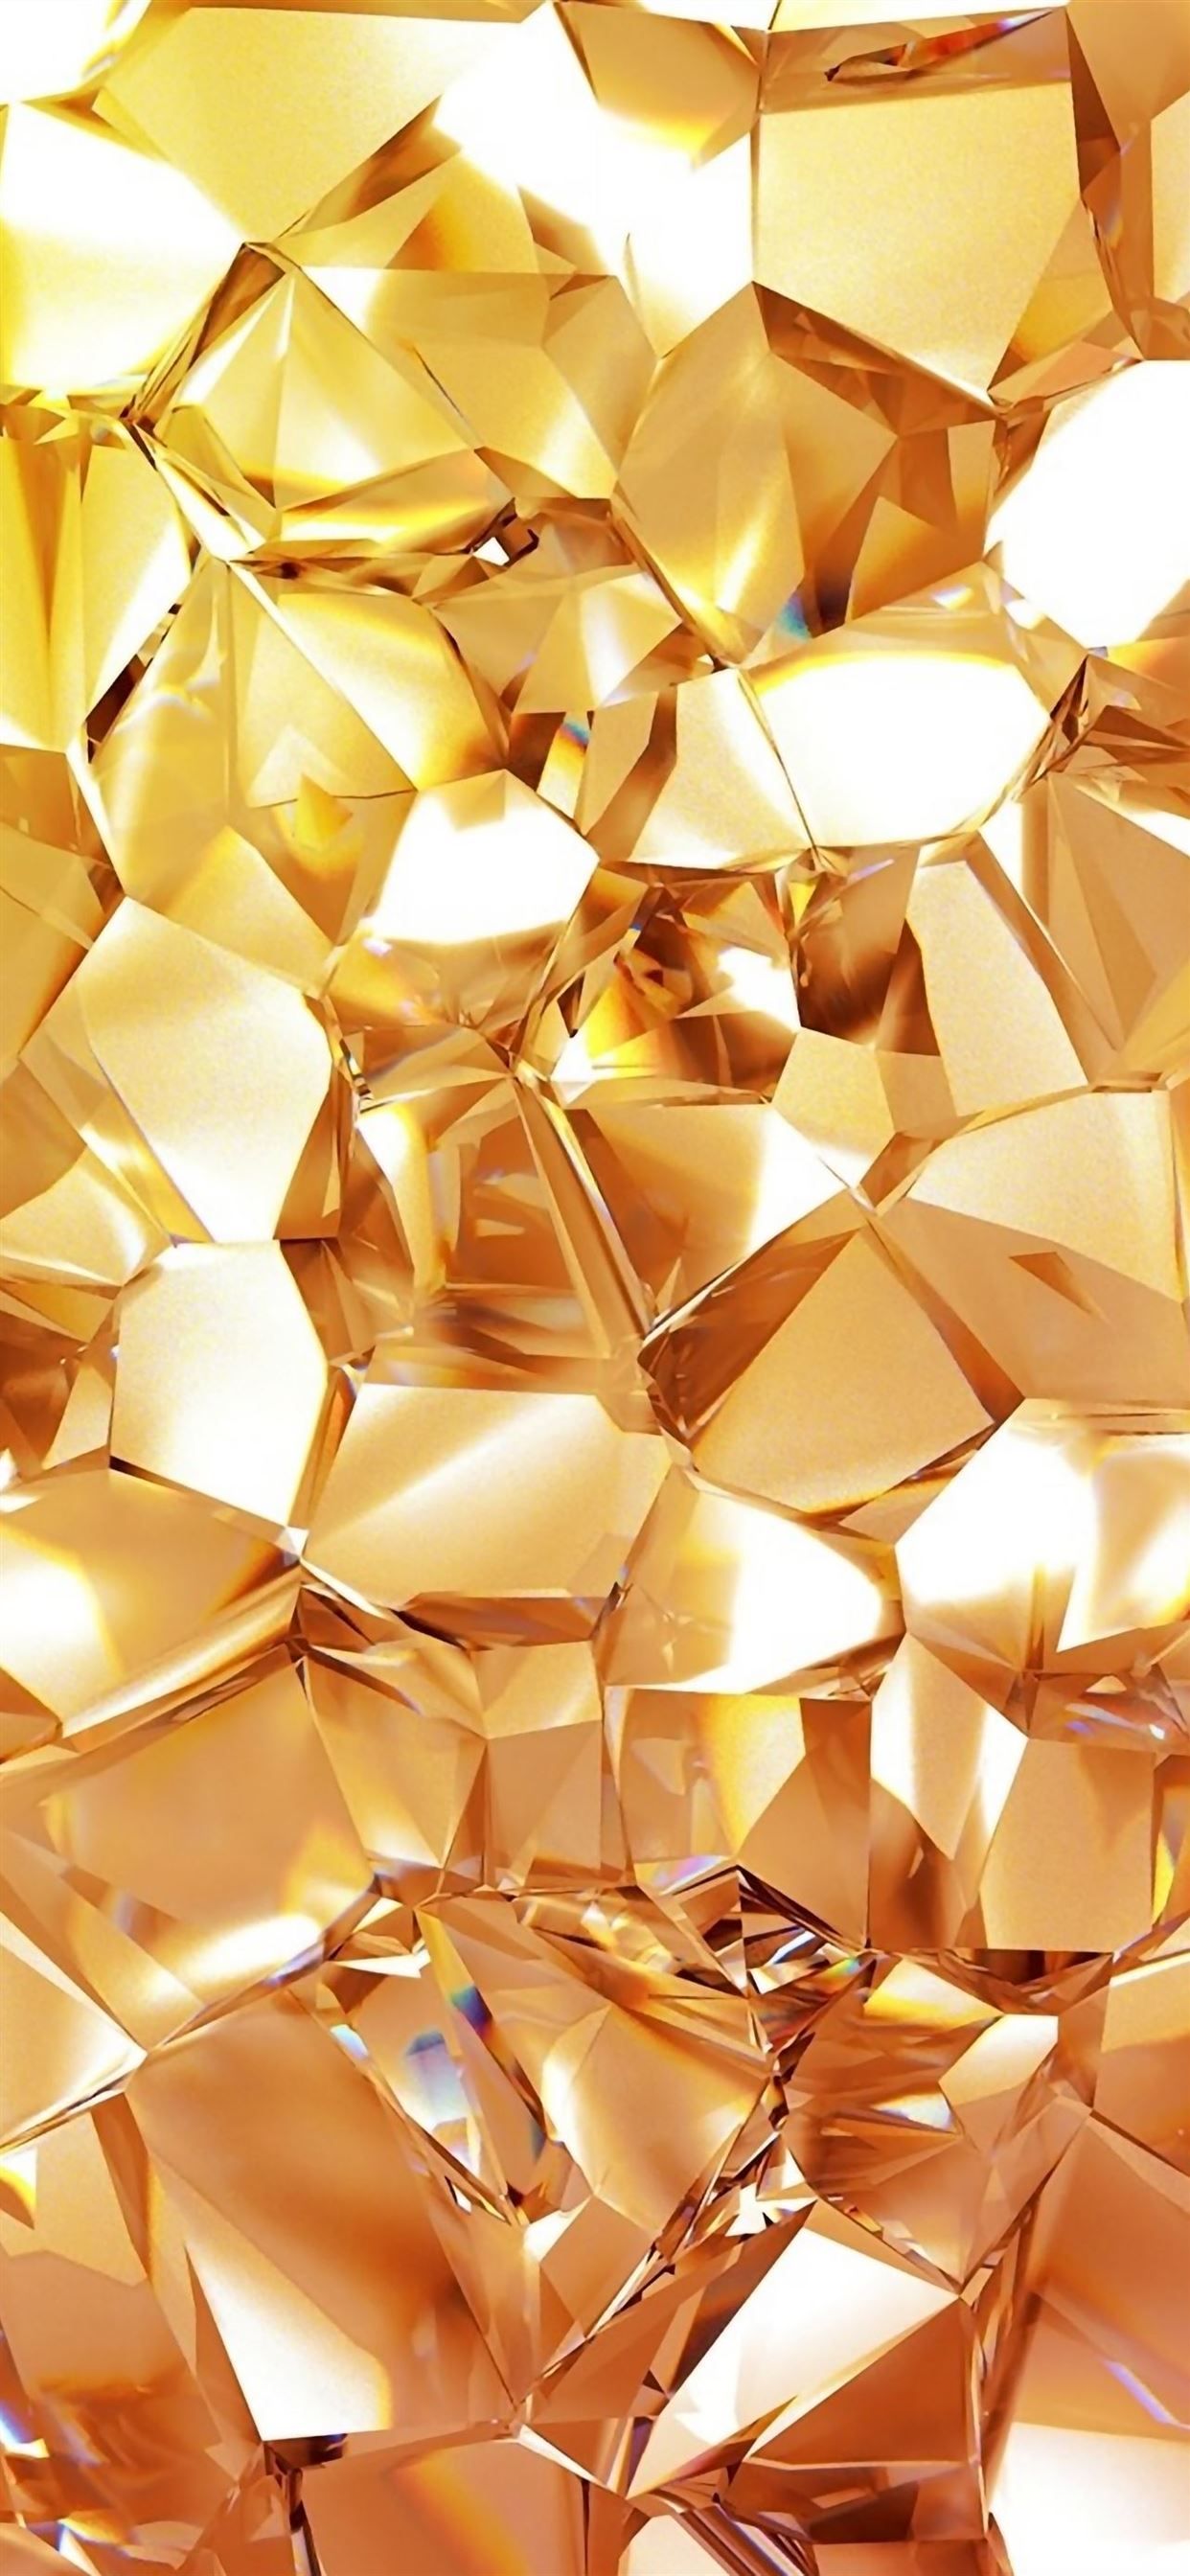 IPhone wallpaper of gold broken glass on a white background - Diamond